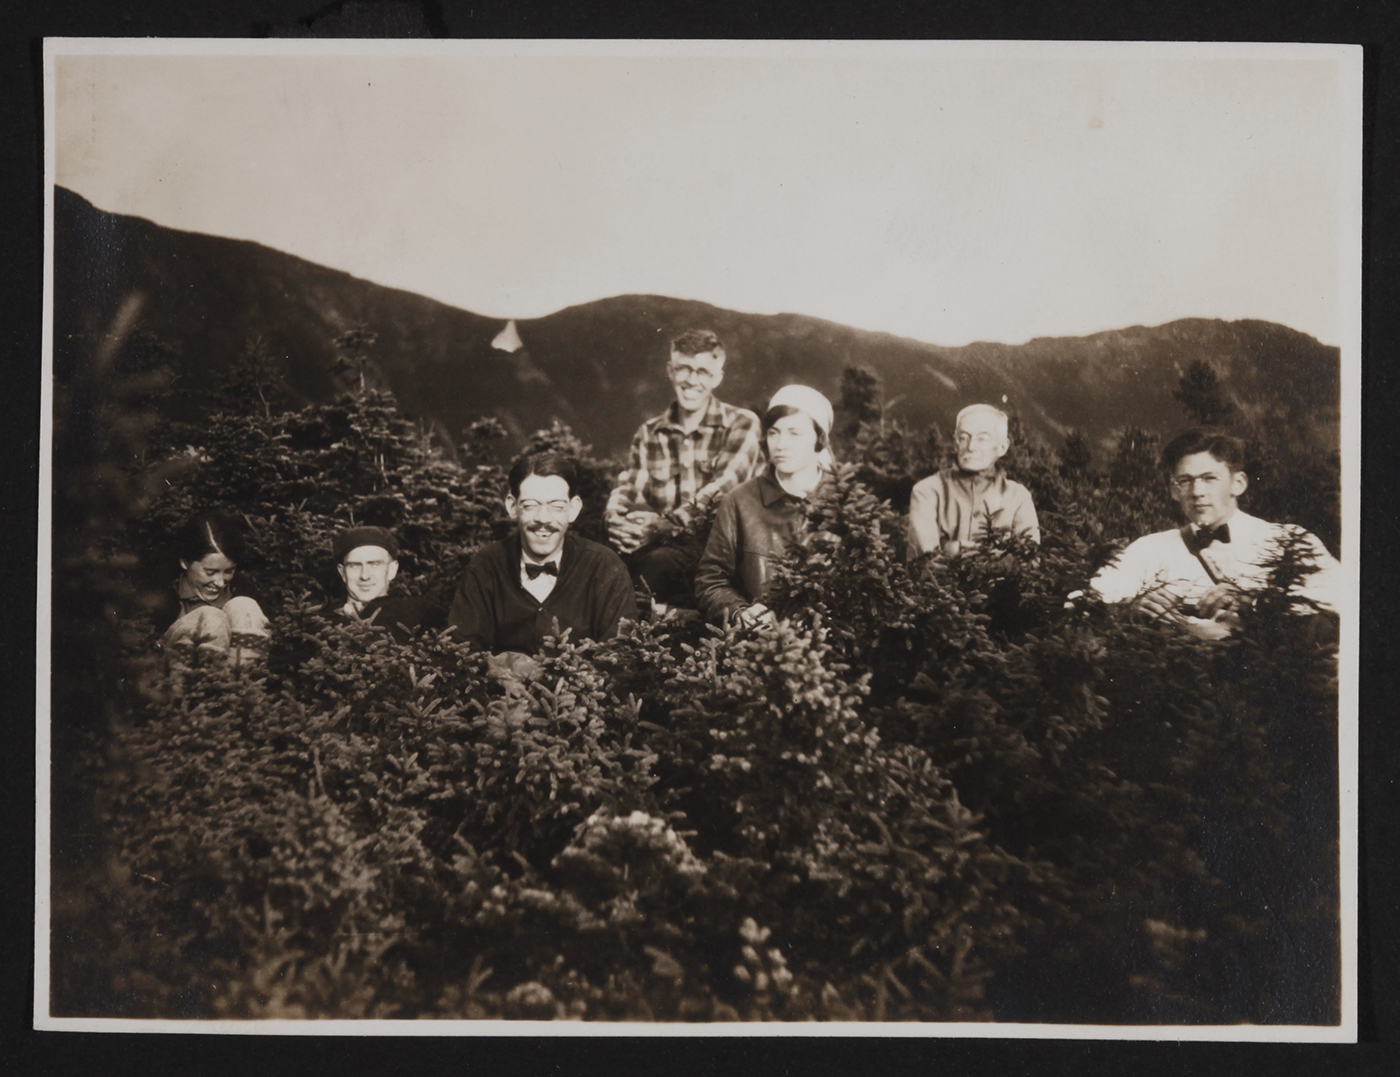 AMC LIBRARY AND ARCHIVES Hikers rest in the krummholz along the abandoned route of the Old Bridal Path on Mount Lafayette in 1920